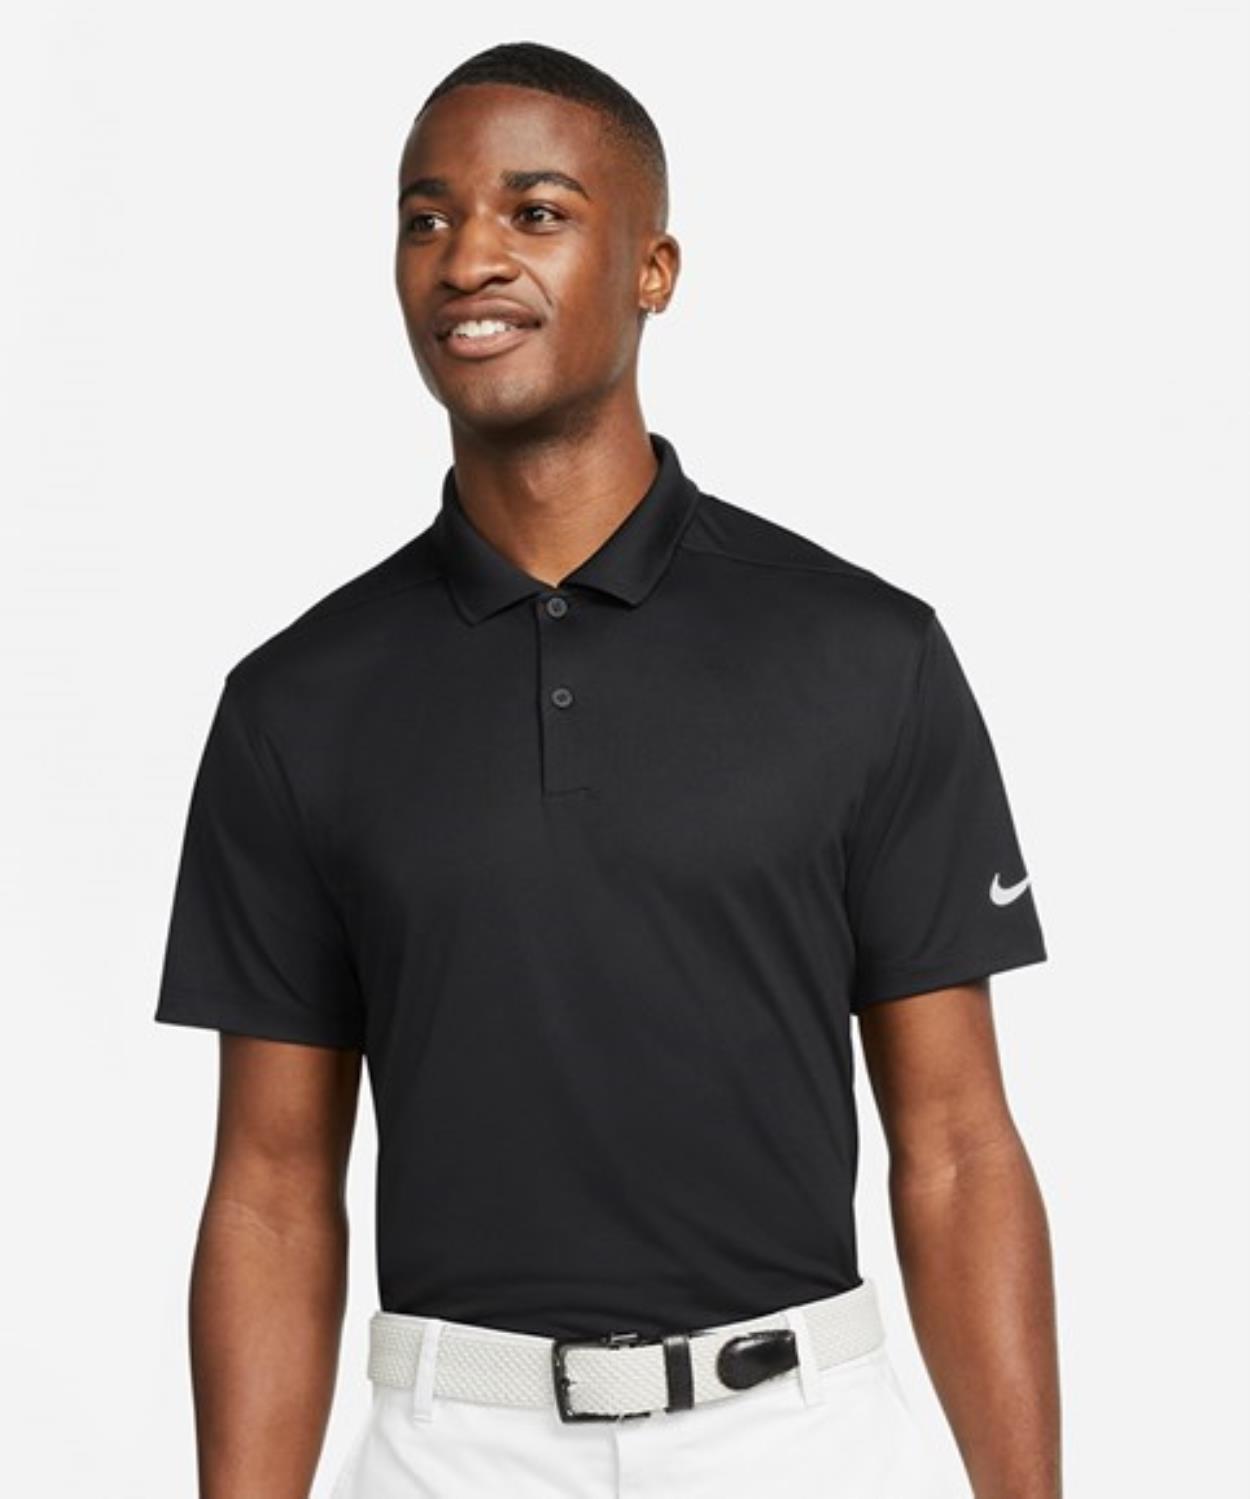 NK342 Nike Victory solid polo main image